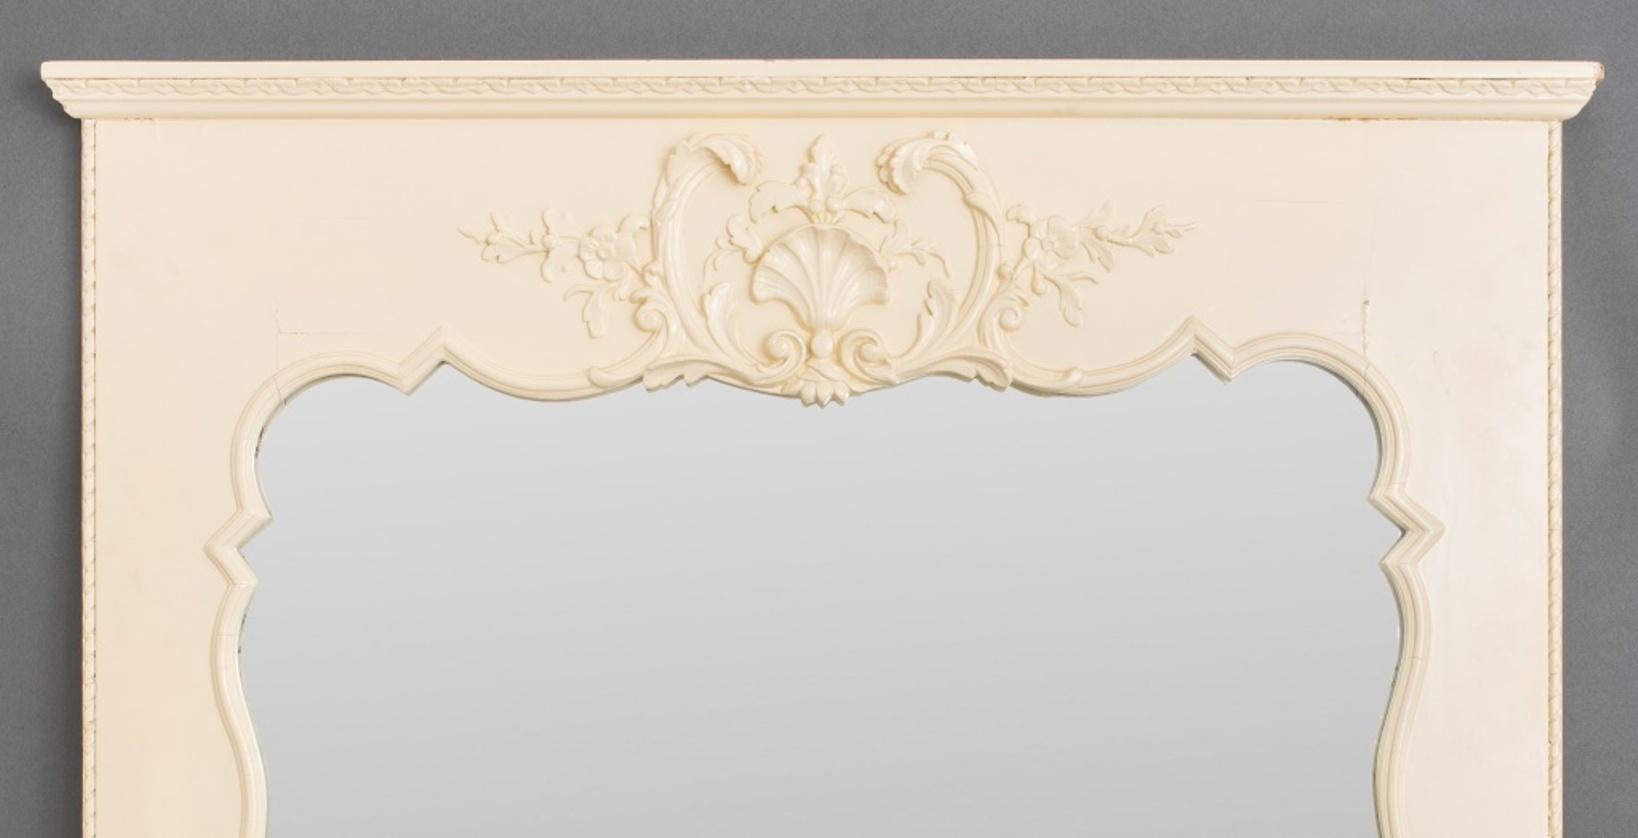 Hollywood Regency painted trumeau wall mirror with scrolls and shell cartouche crest.

Dimensions: 50